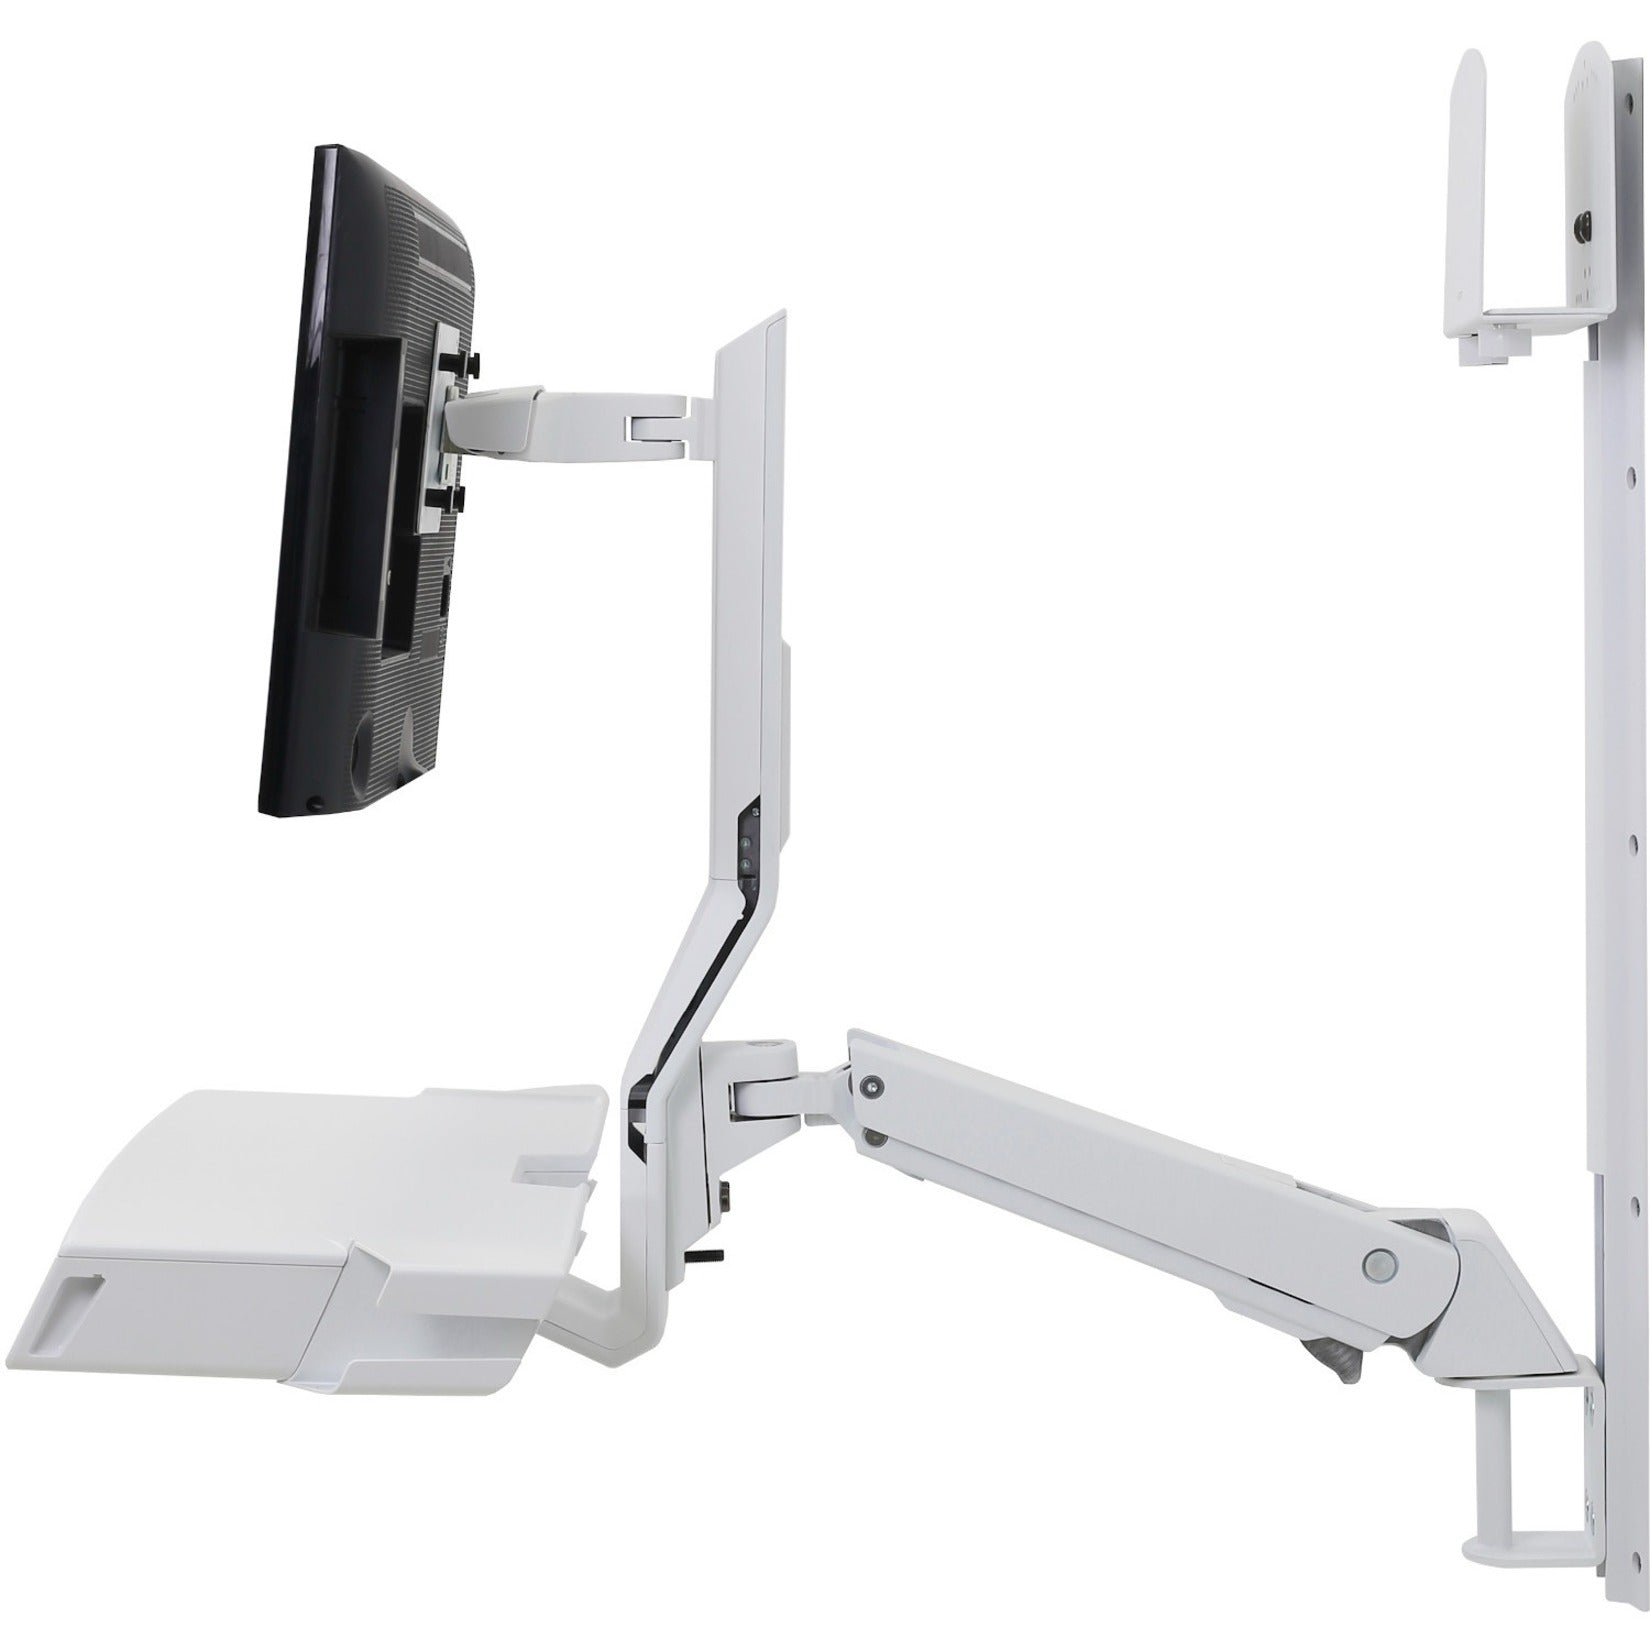 Ergotron 45-594-216 StyleView Wall Mount for Keyboard, Monitor, Bar Code Scanner, Mouse, CPU, Wrist Rest, LCD Display - White